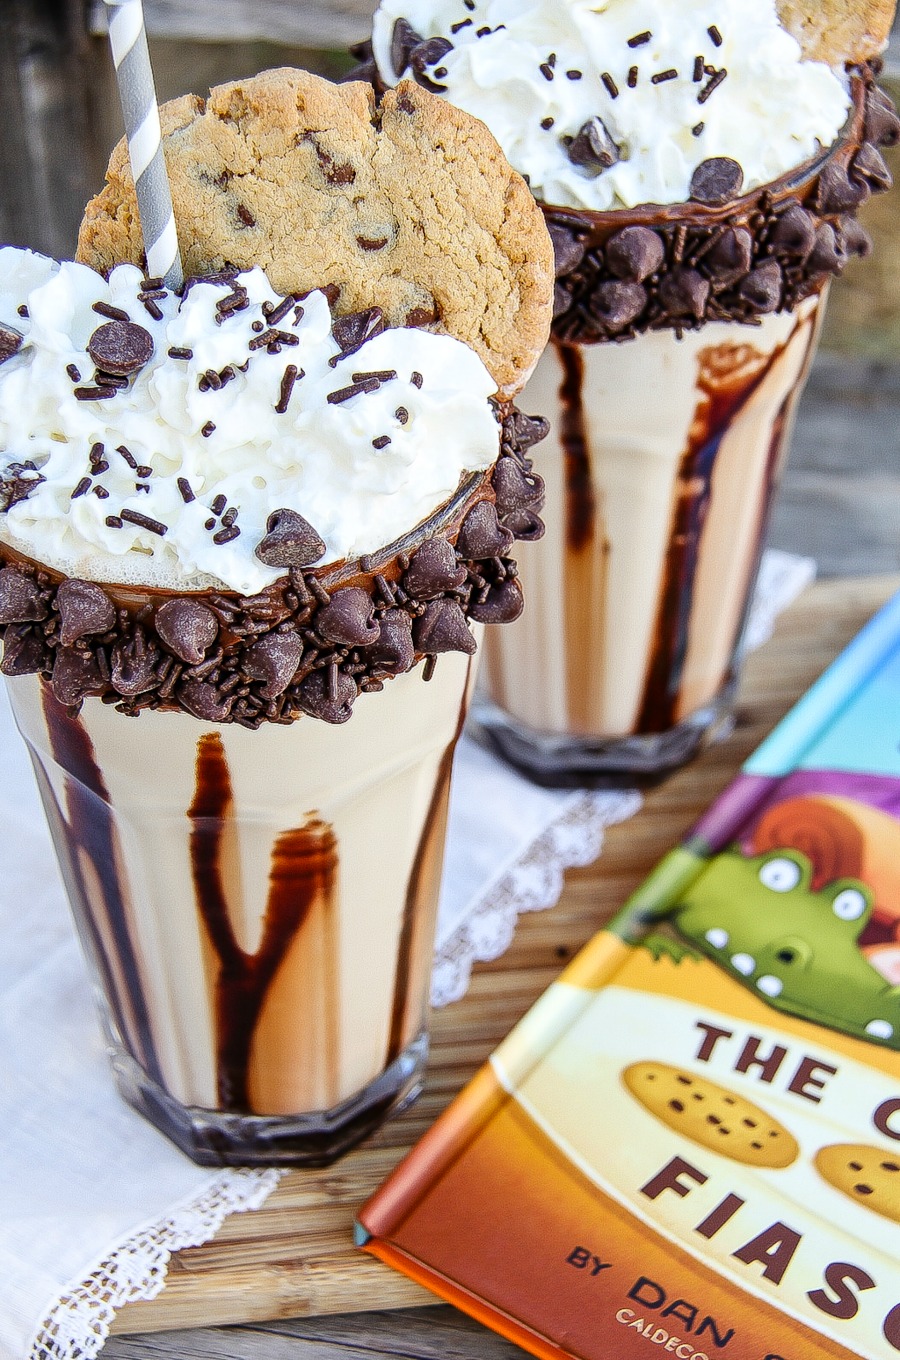 Over-the-top gluten-free chocolate chip cookie milkshake inspired by The Cookie Fiasco book